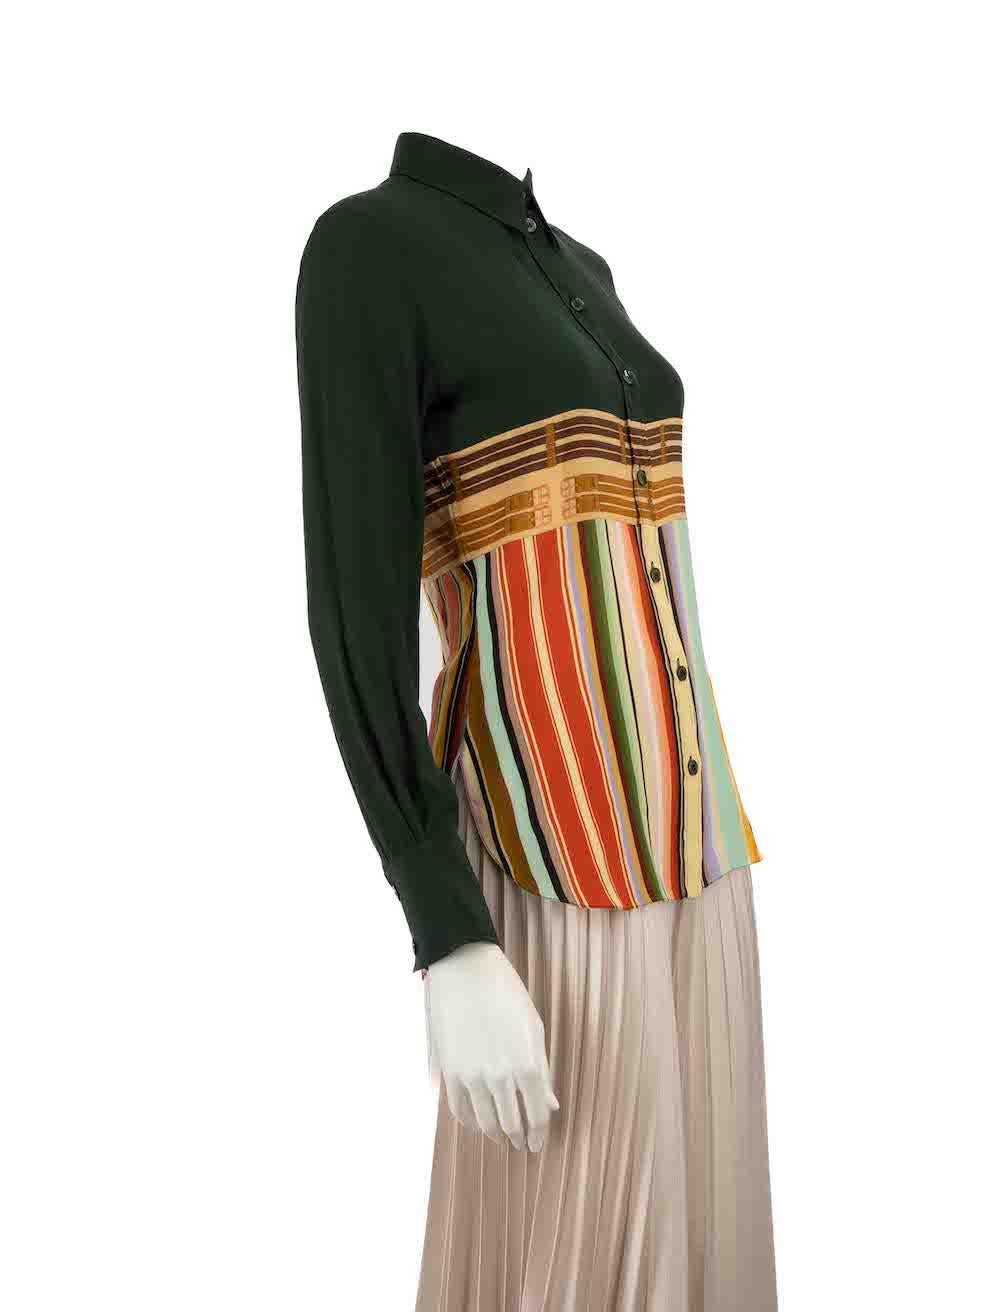 CONDITION is Very good. Minimal wear to shirt is evident. Minimal wear to the rear and the right shoulder with light marks on this used Hermès designer resale item.
 
 
 
 Details
 
 
 Multicolour - green, brown and orange
 
 Silk
 
 Shirt
 
